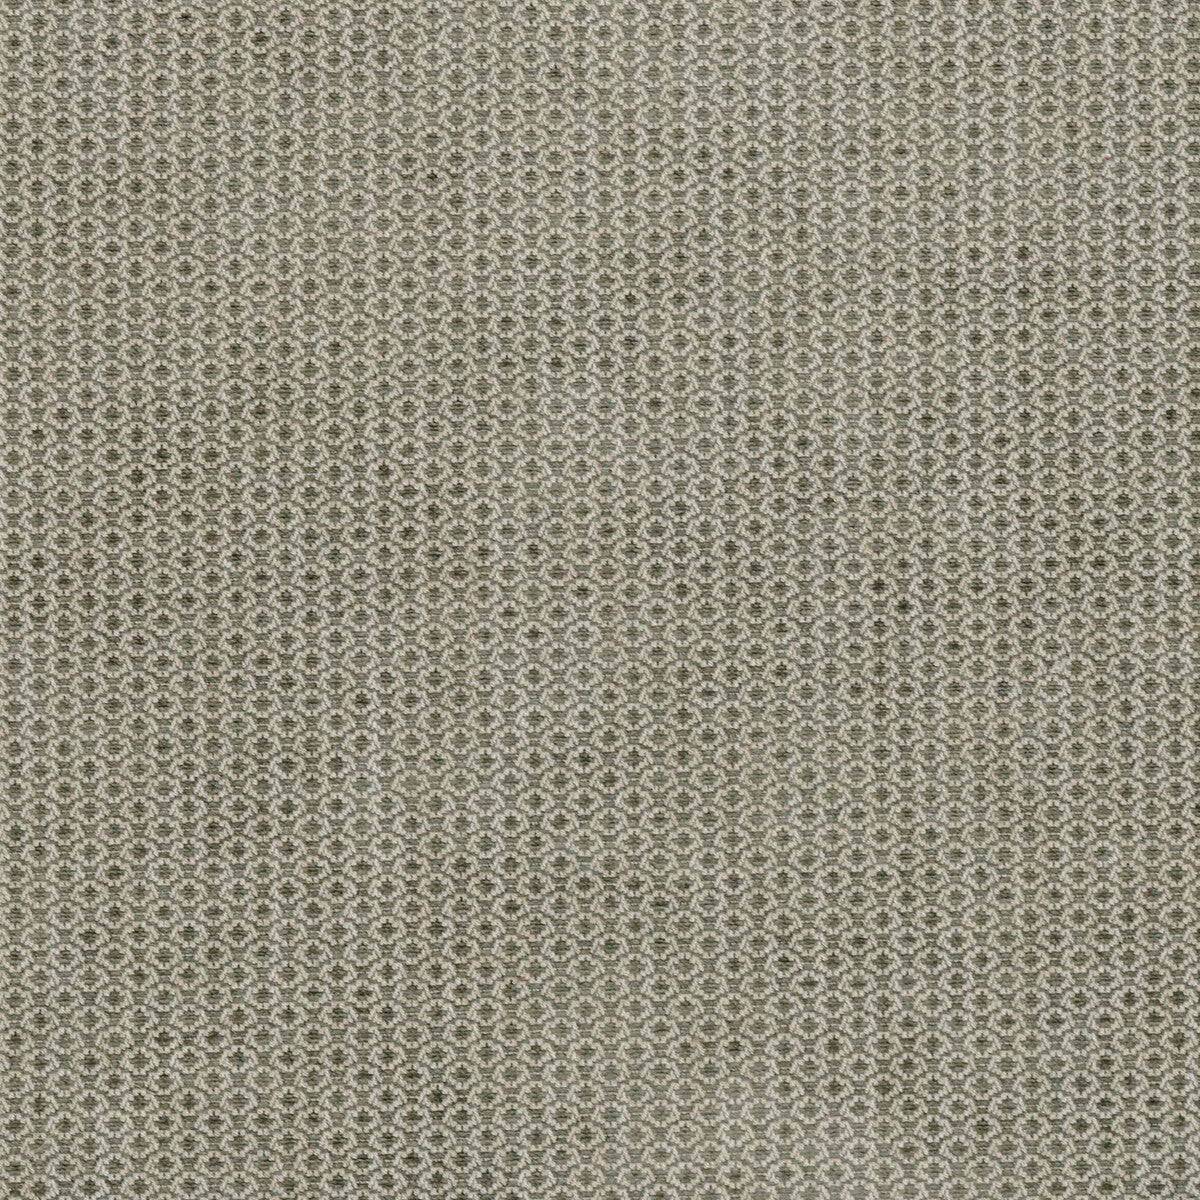 Cosgrove fabric in fawn color - pattern BFC-3672.11.0 - by Lee Jofa in the Blithfield collection